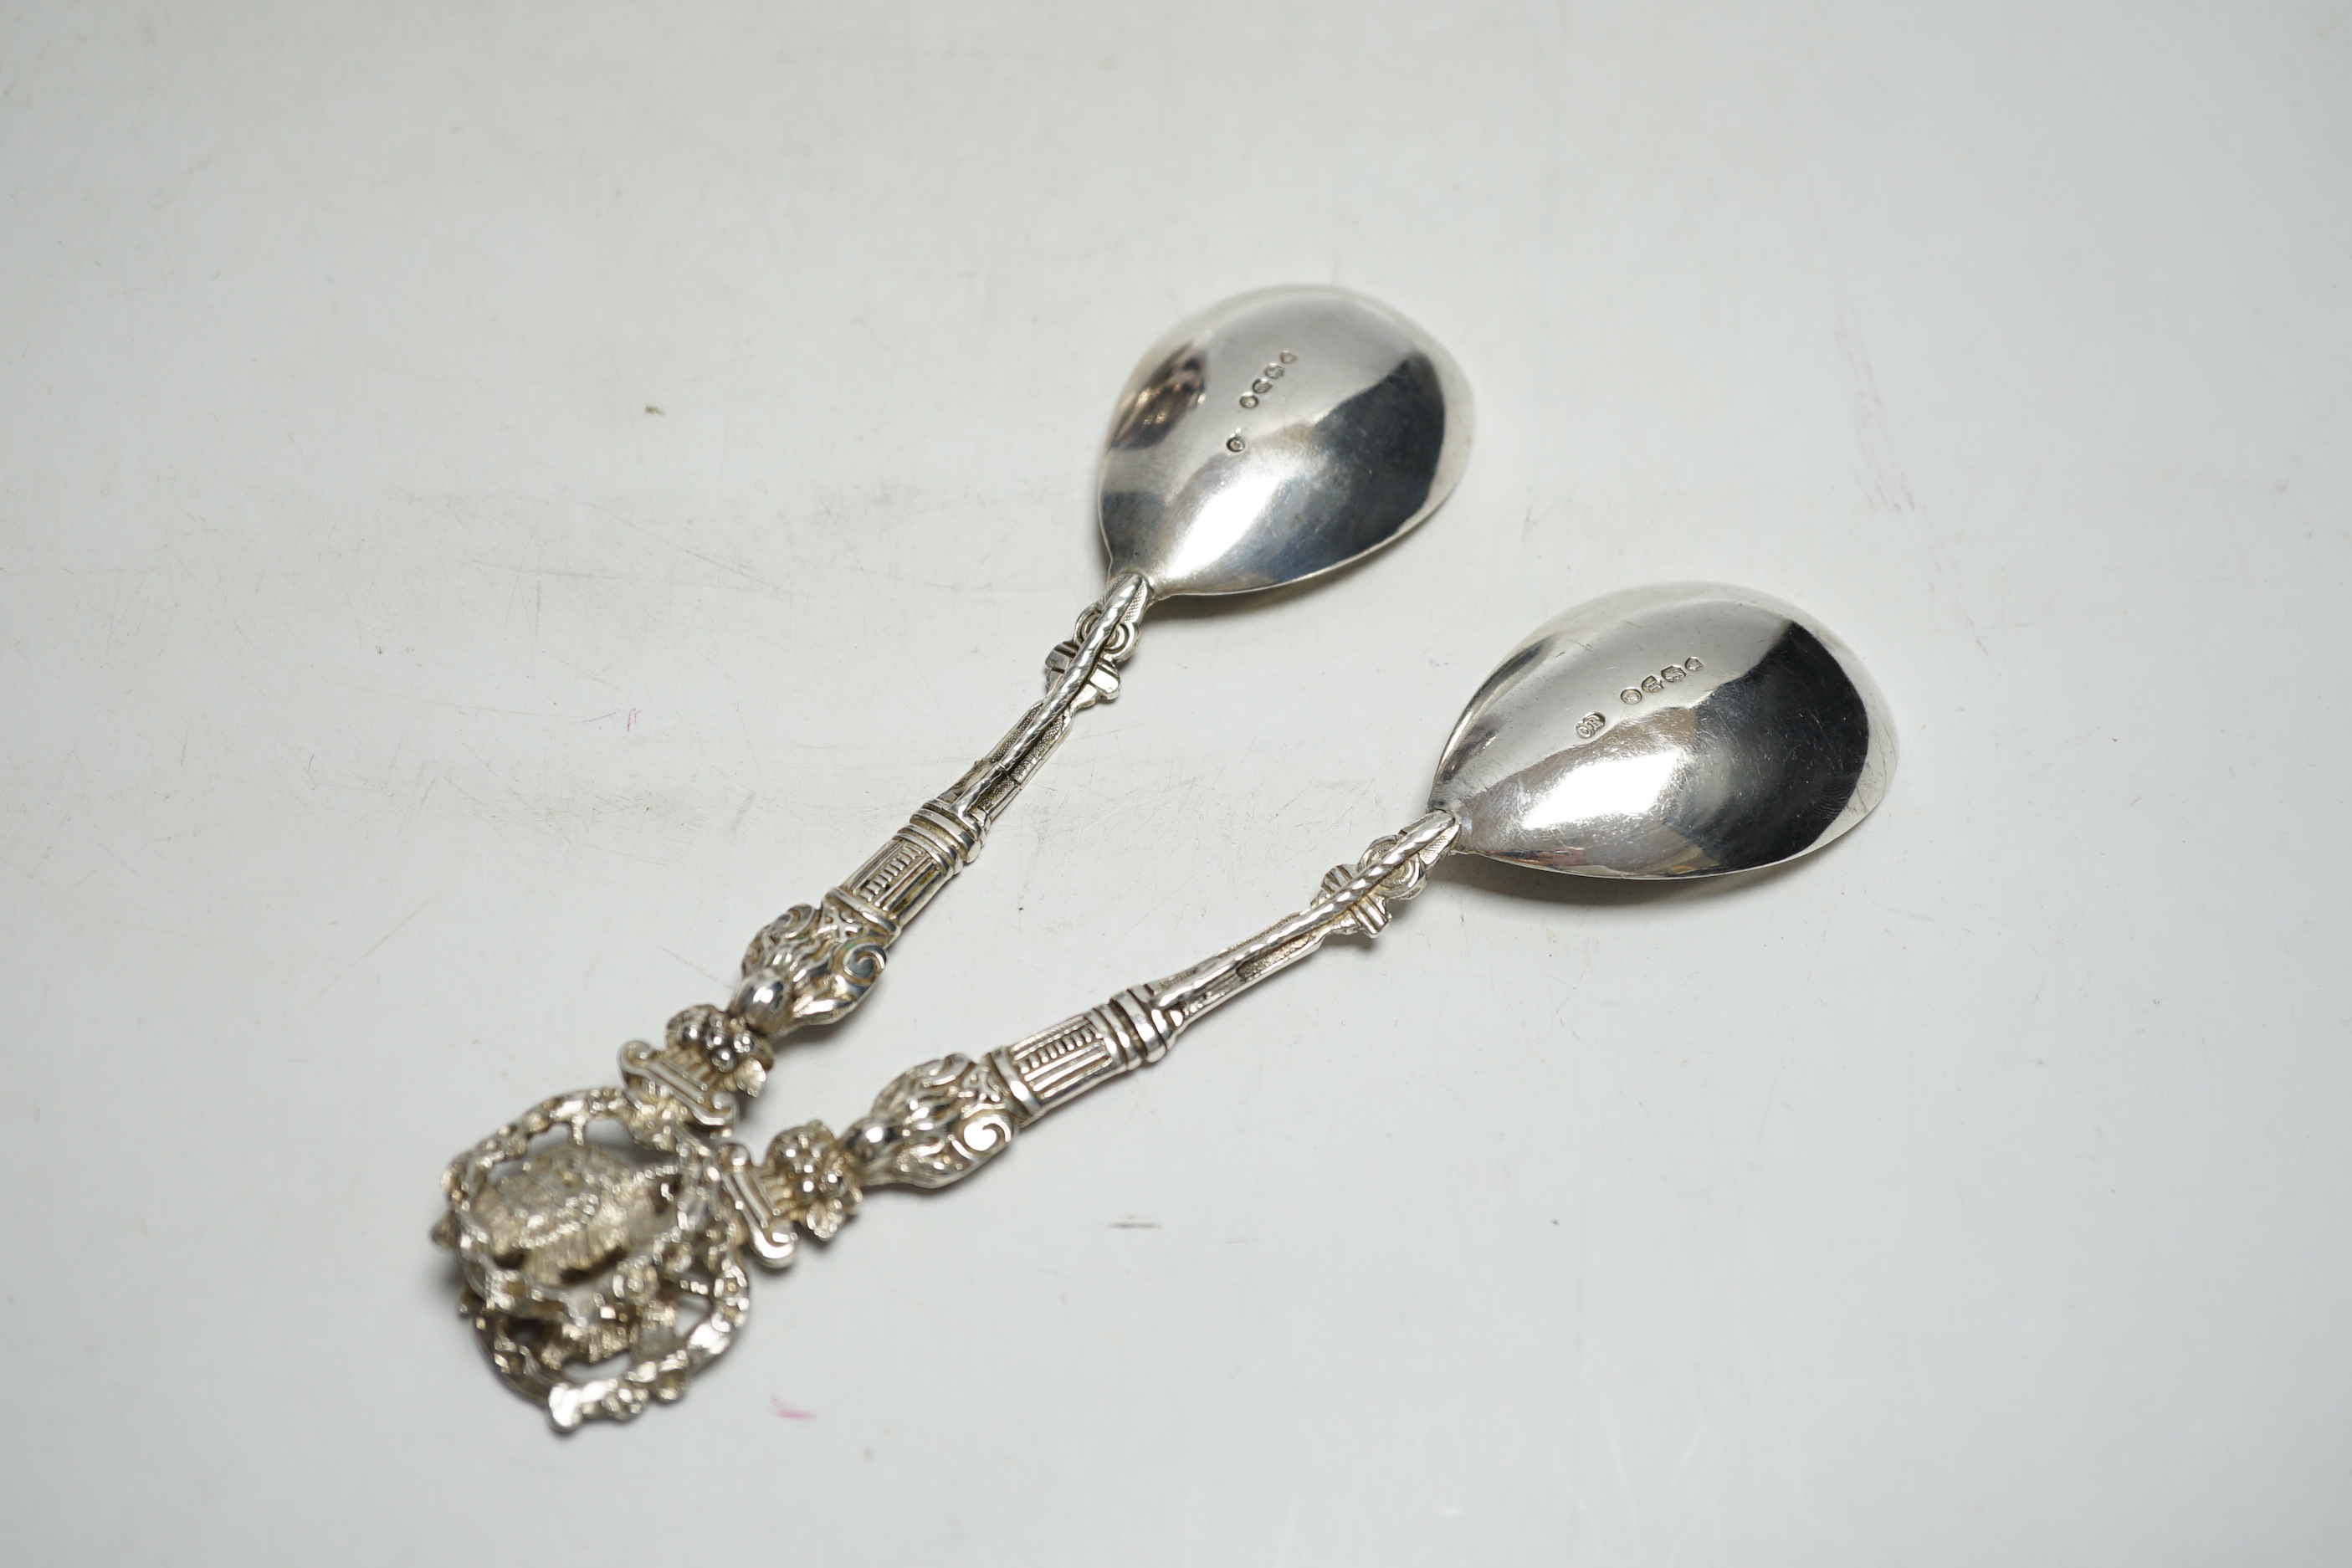 A pair of Victorian silver serving spoons, with figural handles and phoenix terminals, Charles Boyton, London, 1882, 18.9cm, 4.2oz.